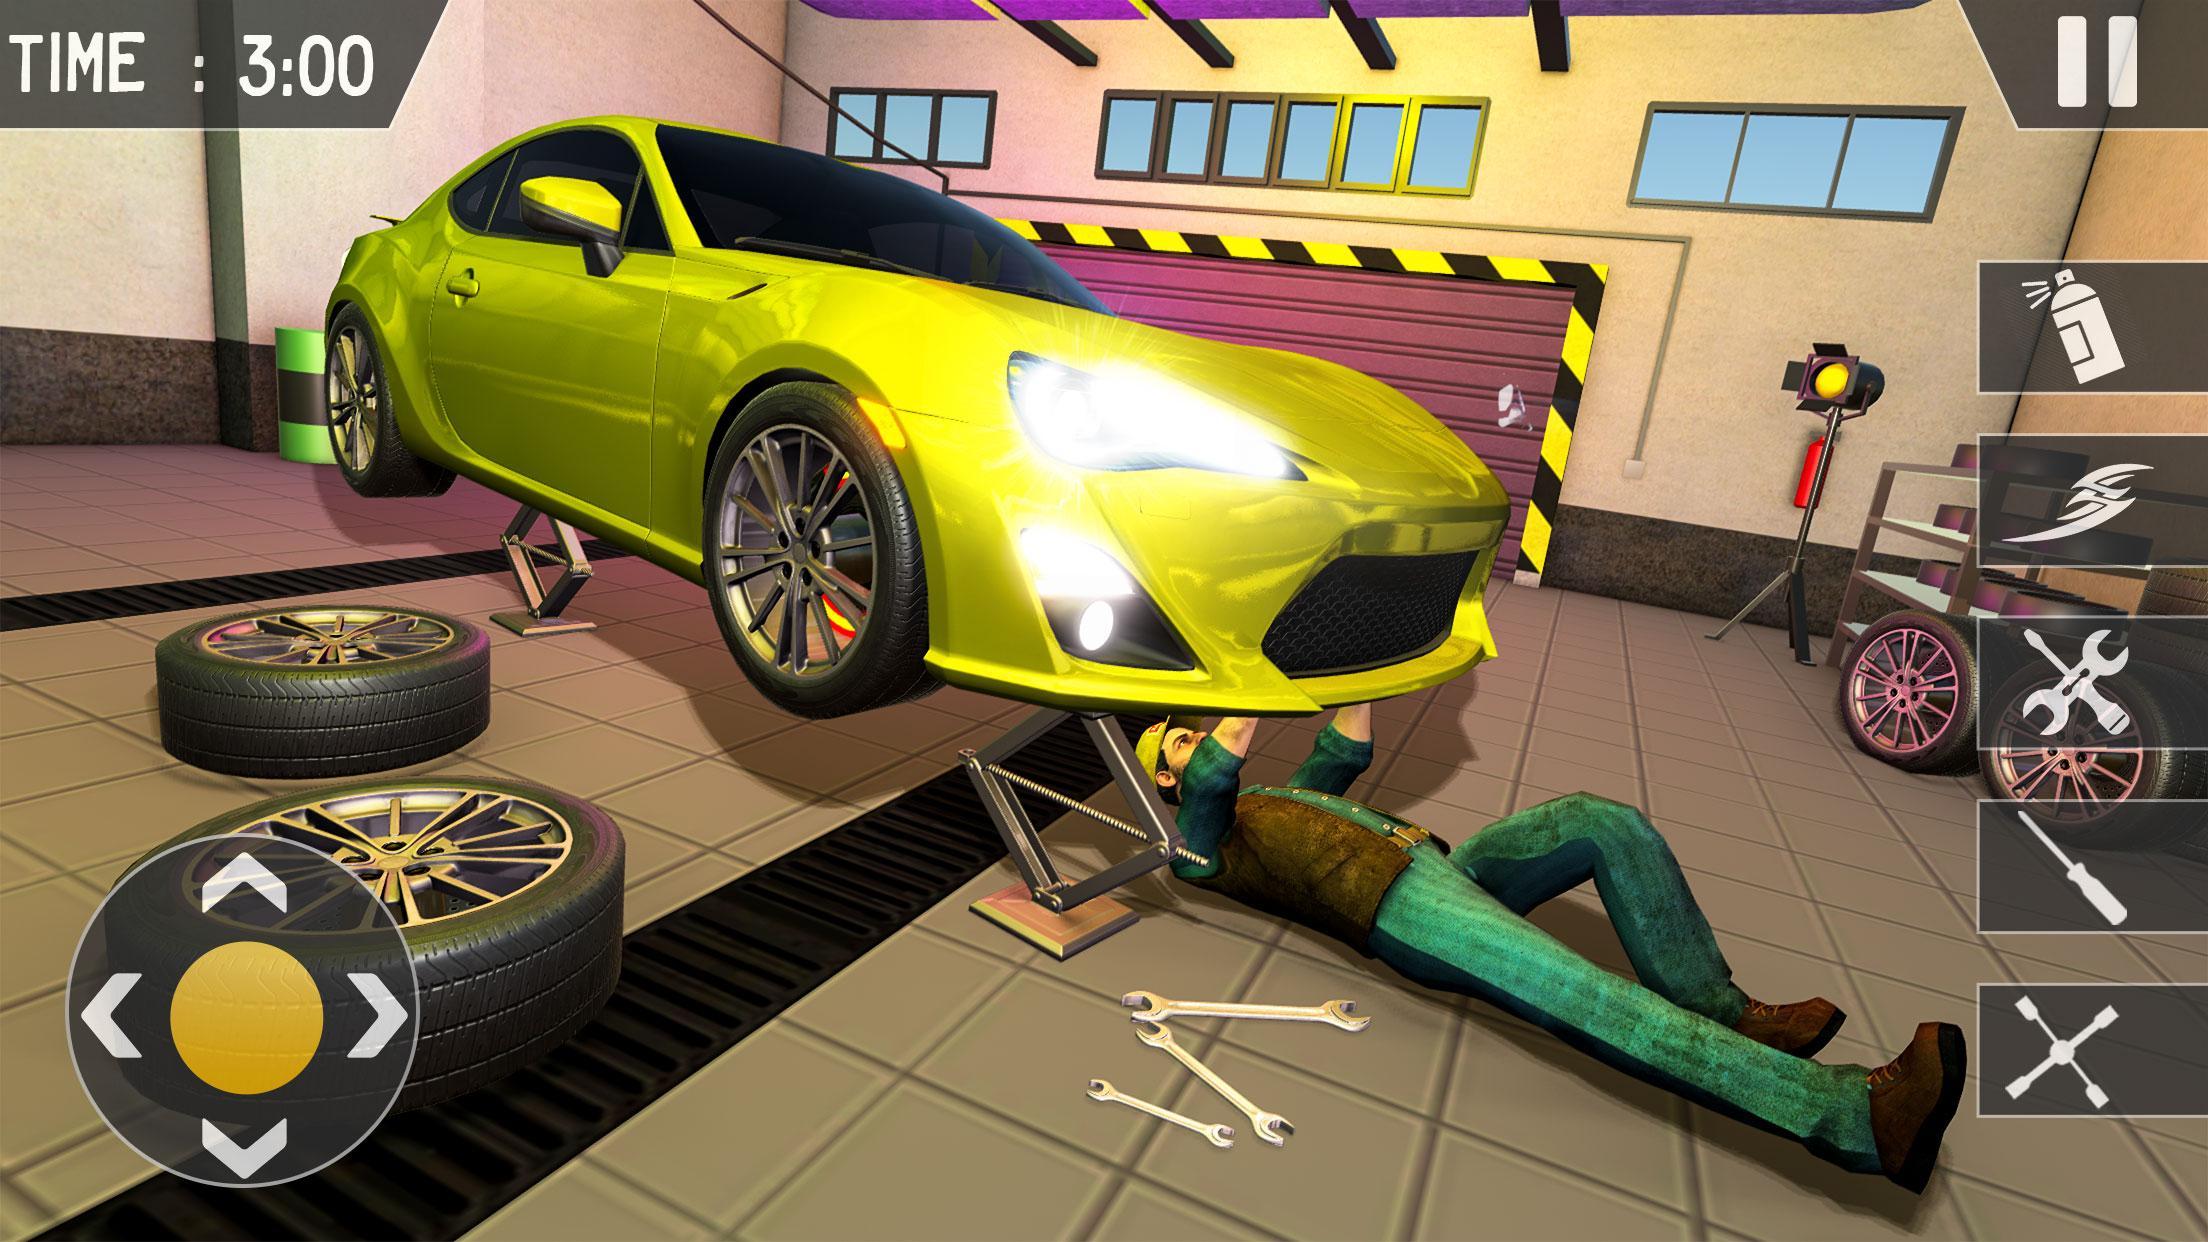 Auto Repairing Car Mechanic For Android Apk Download - my own car wash business in roblox roblox car wash tycoon youtube